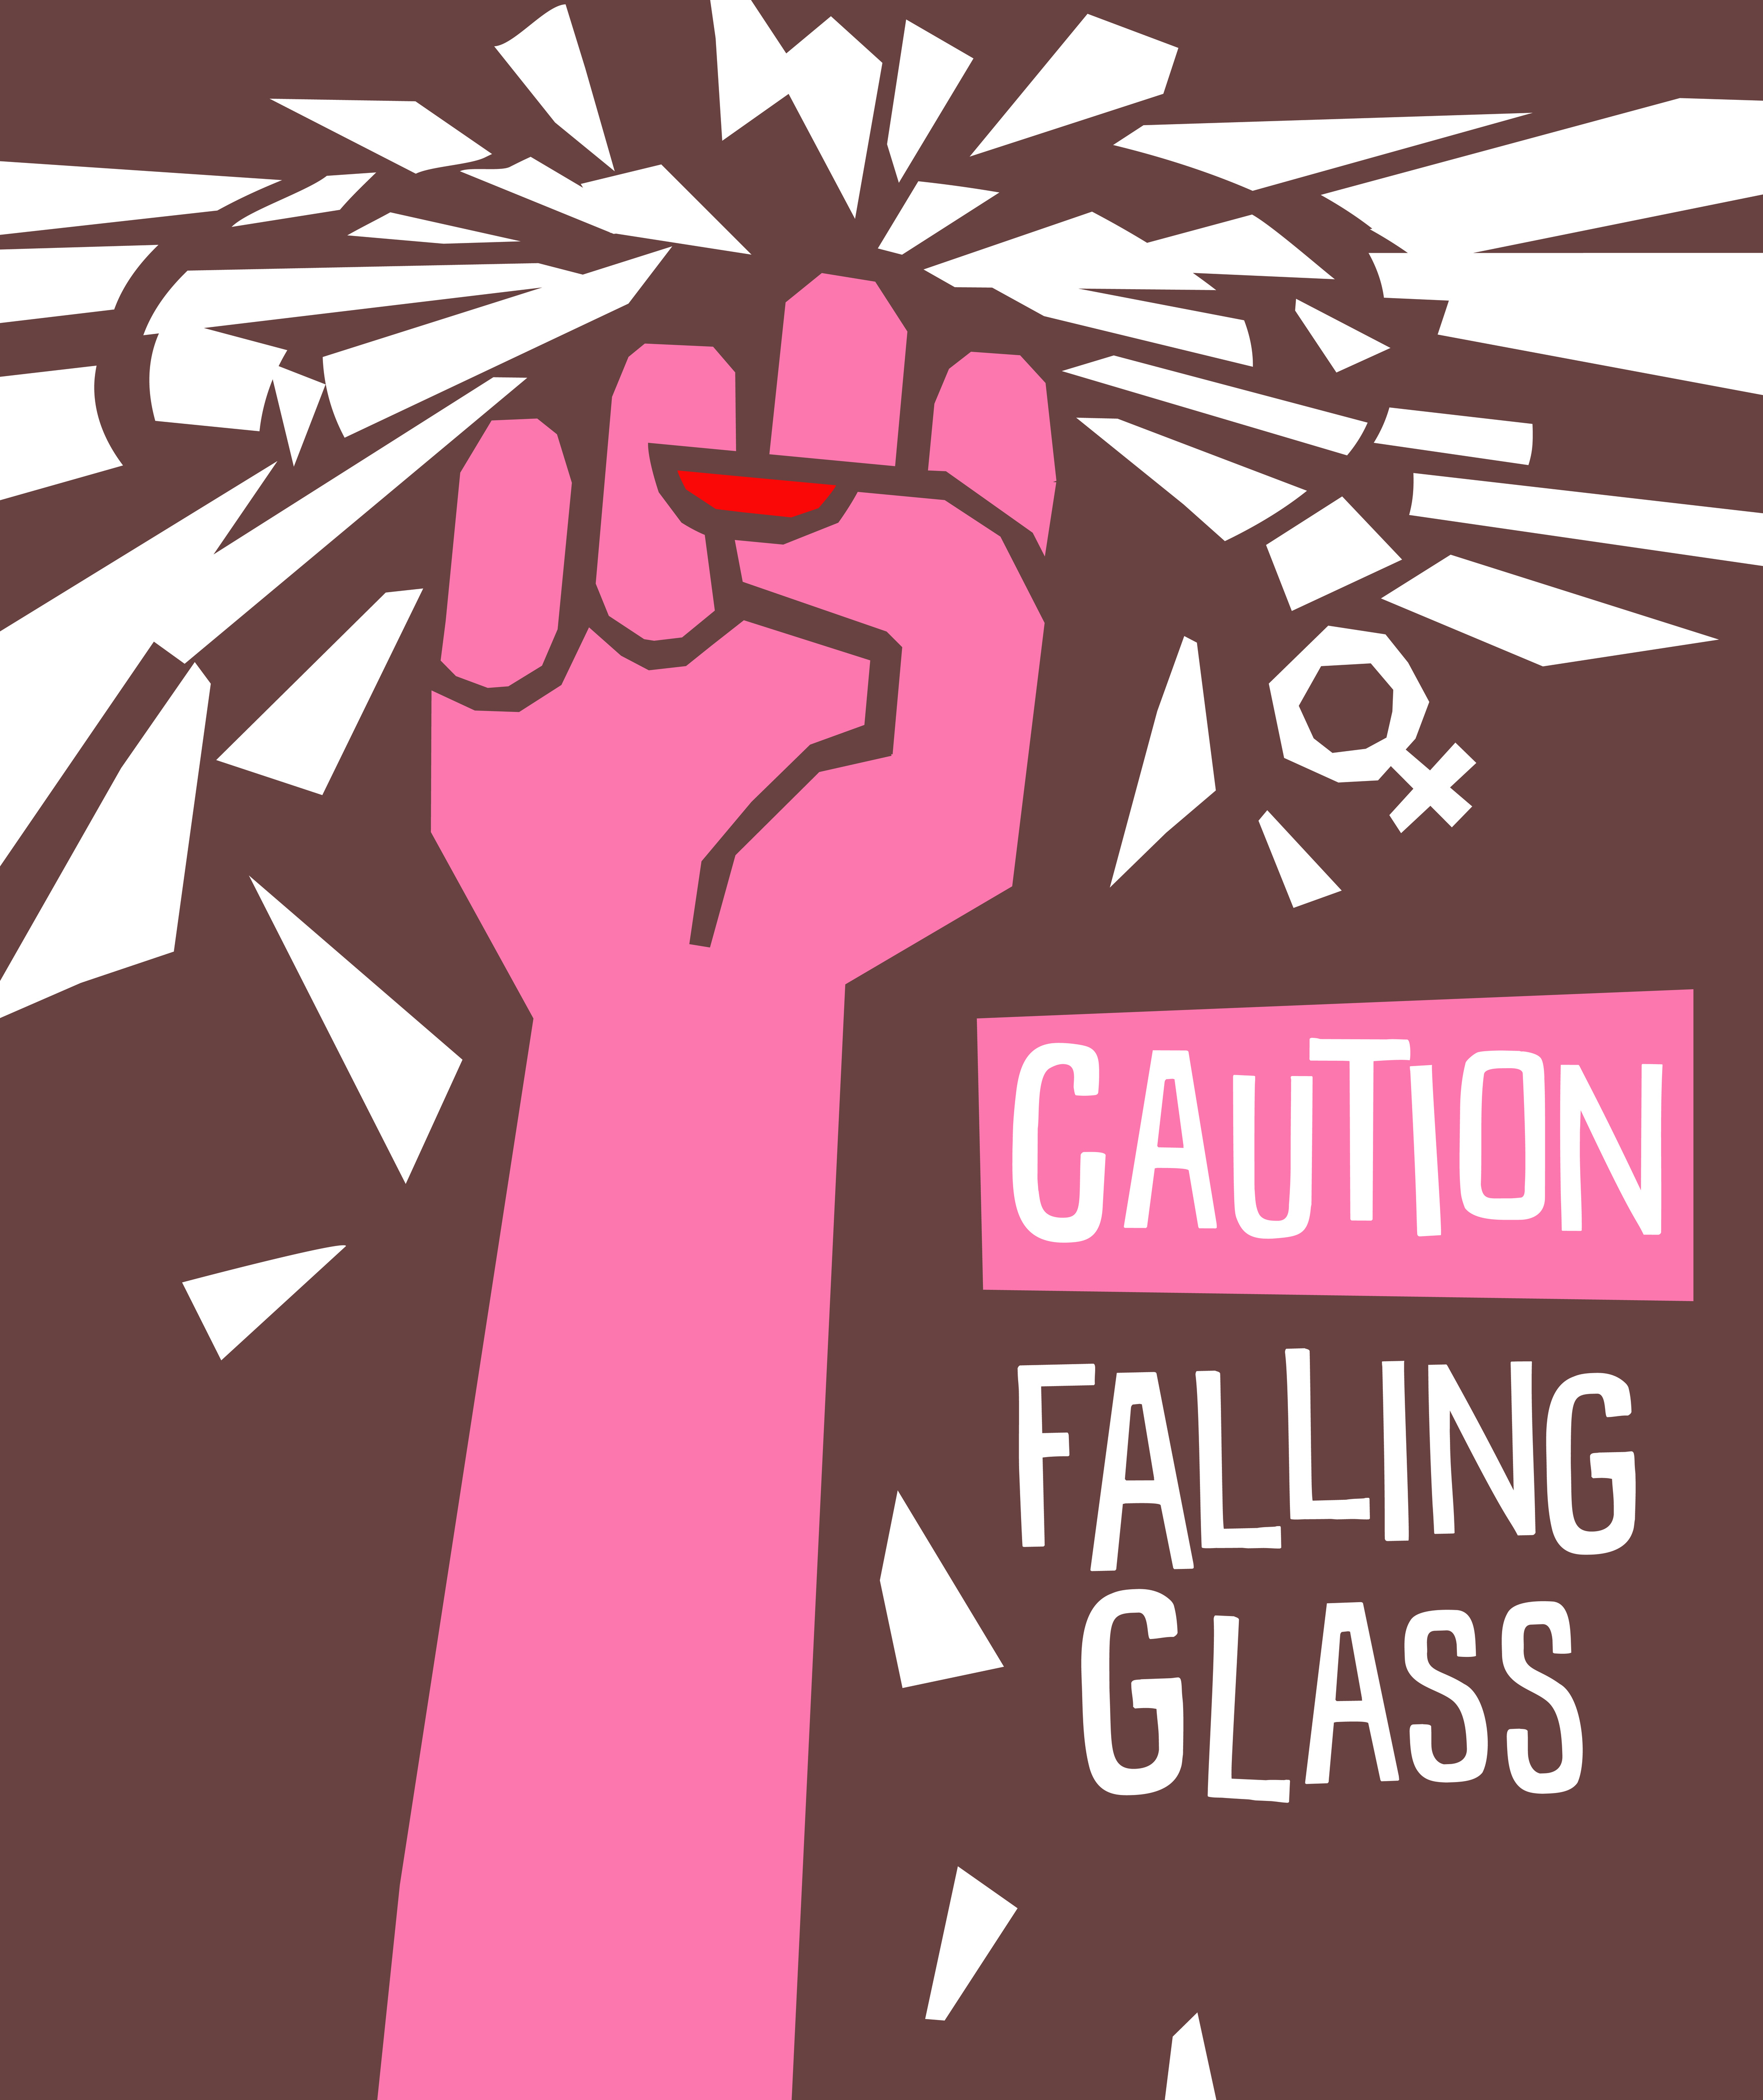 Breaking through the glass ceiling graphic